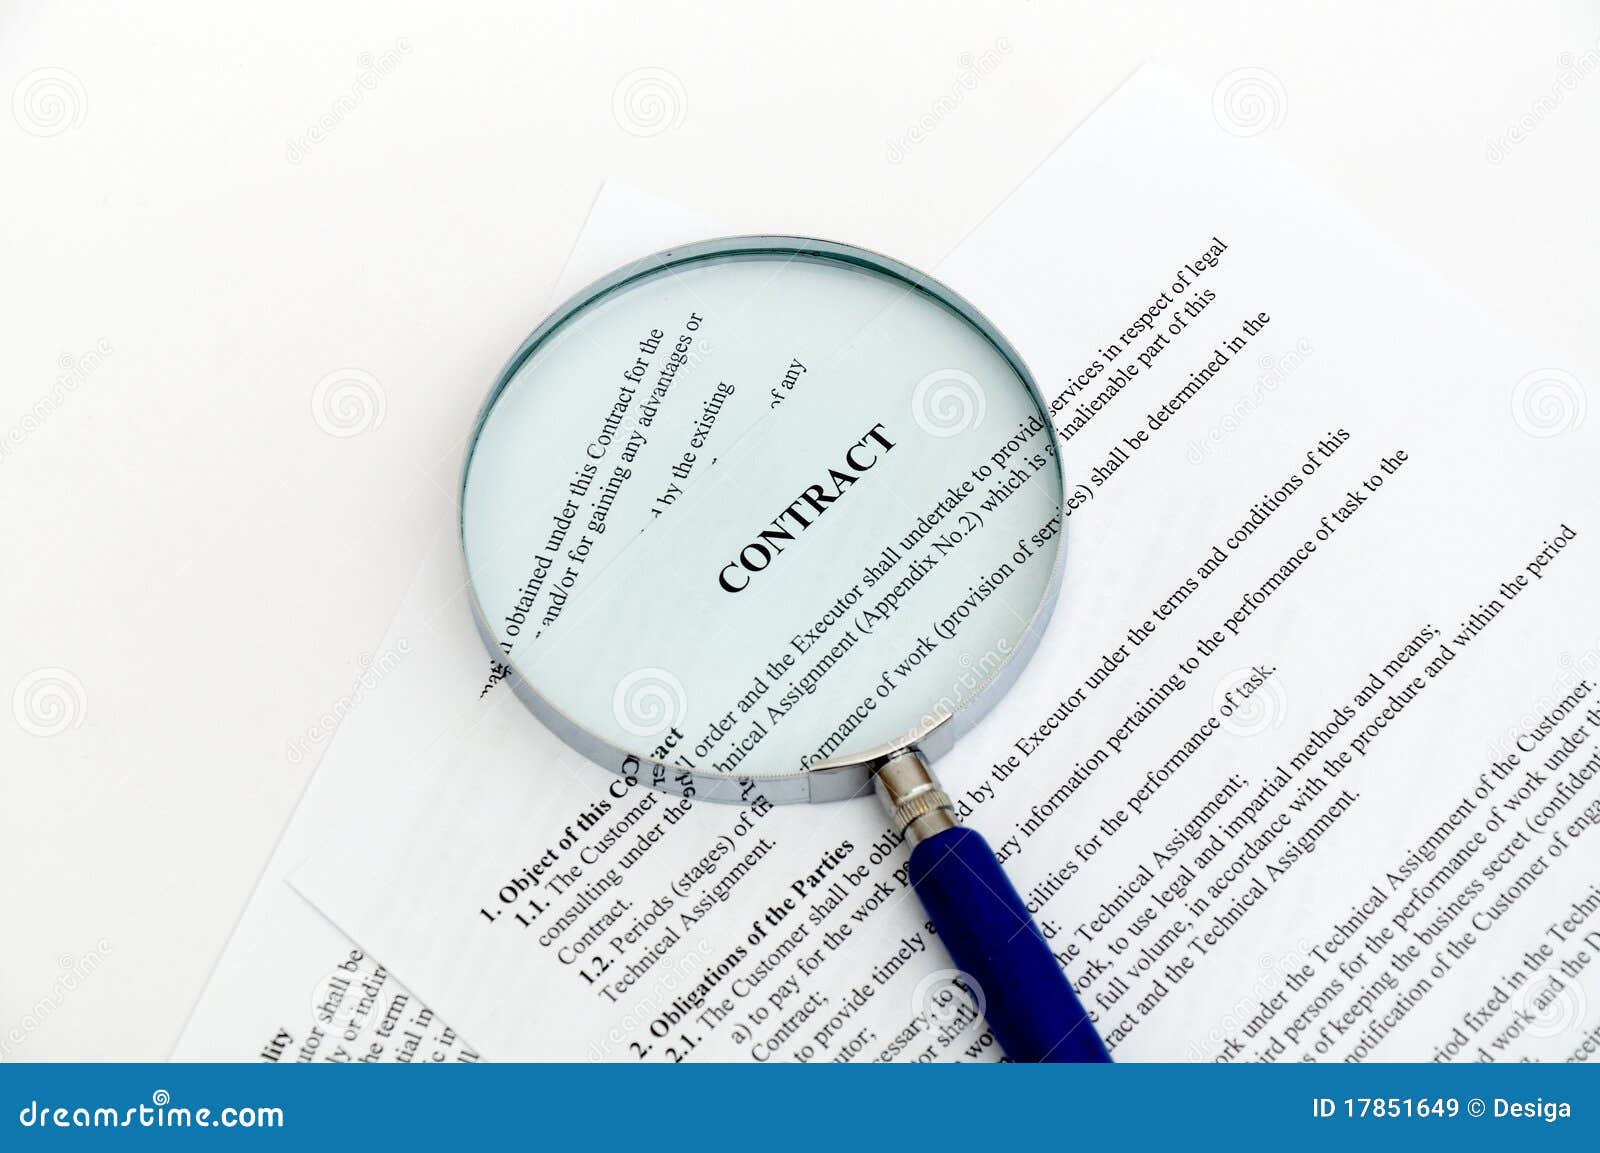 magnifying glass document 17851649